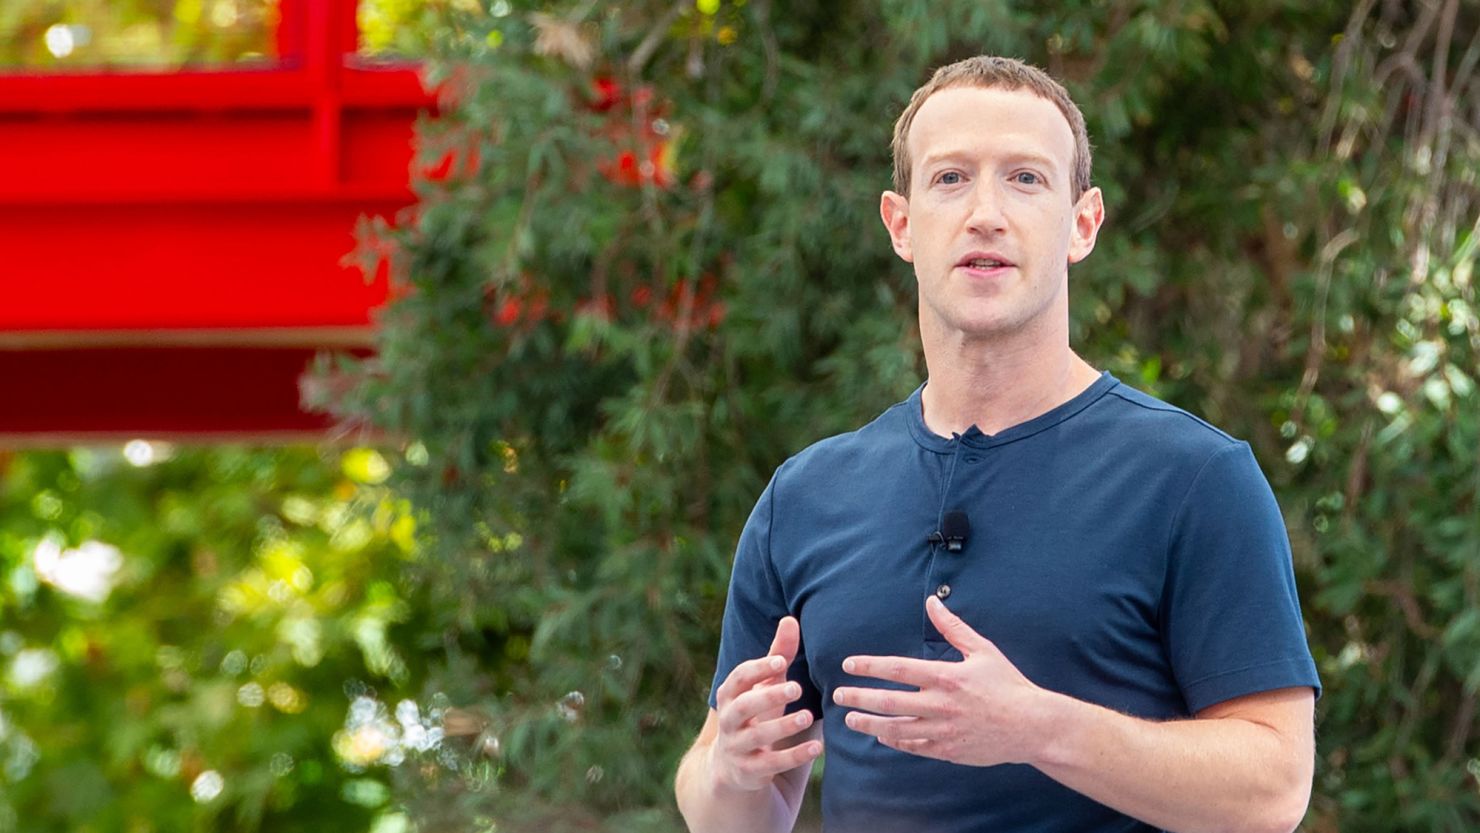 Meta's fourth quarter earnings report came one day after CEO Mark Zuckerberg appeared on Capitol Hill to answer senators' questions about the company's impact on young users.